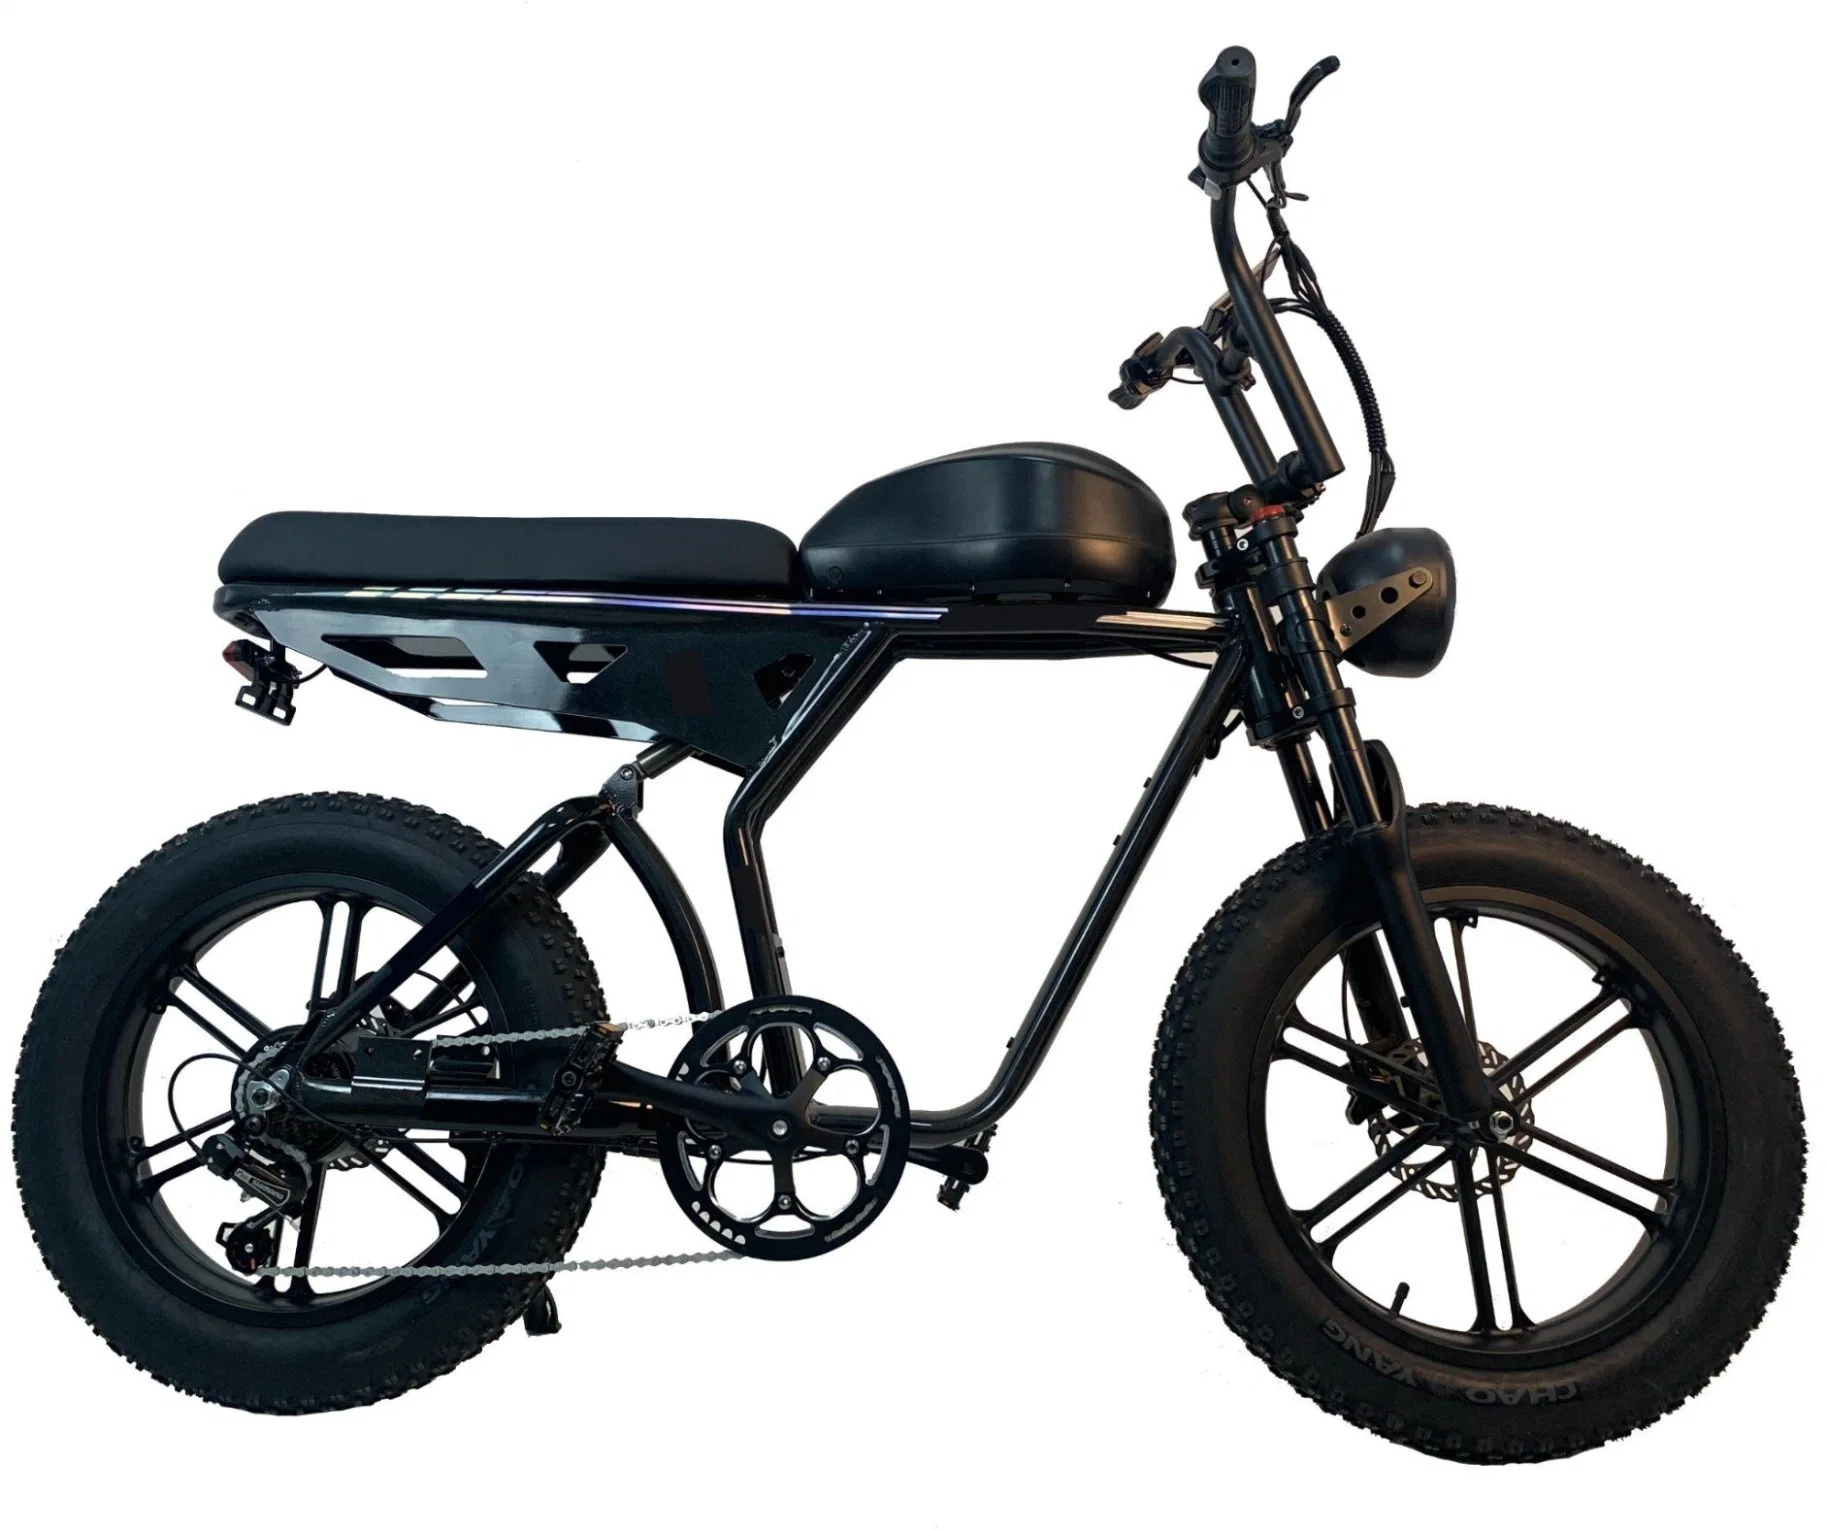 Motorcycle Tailg e bike Hot Sale High Speed 50km/H 2000W Electrical System Adult E Scooters Electric Motorcycle